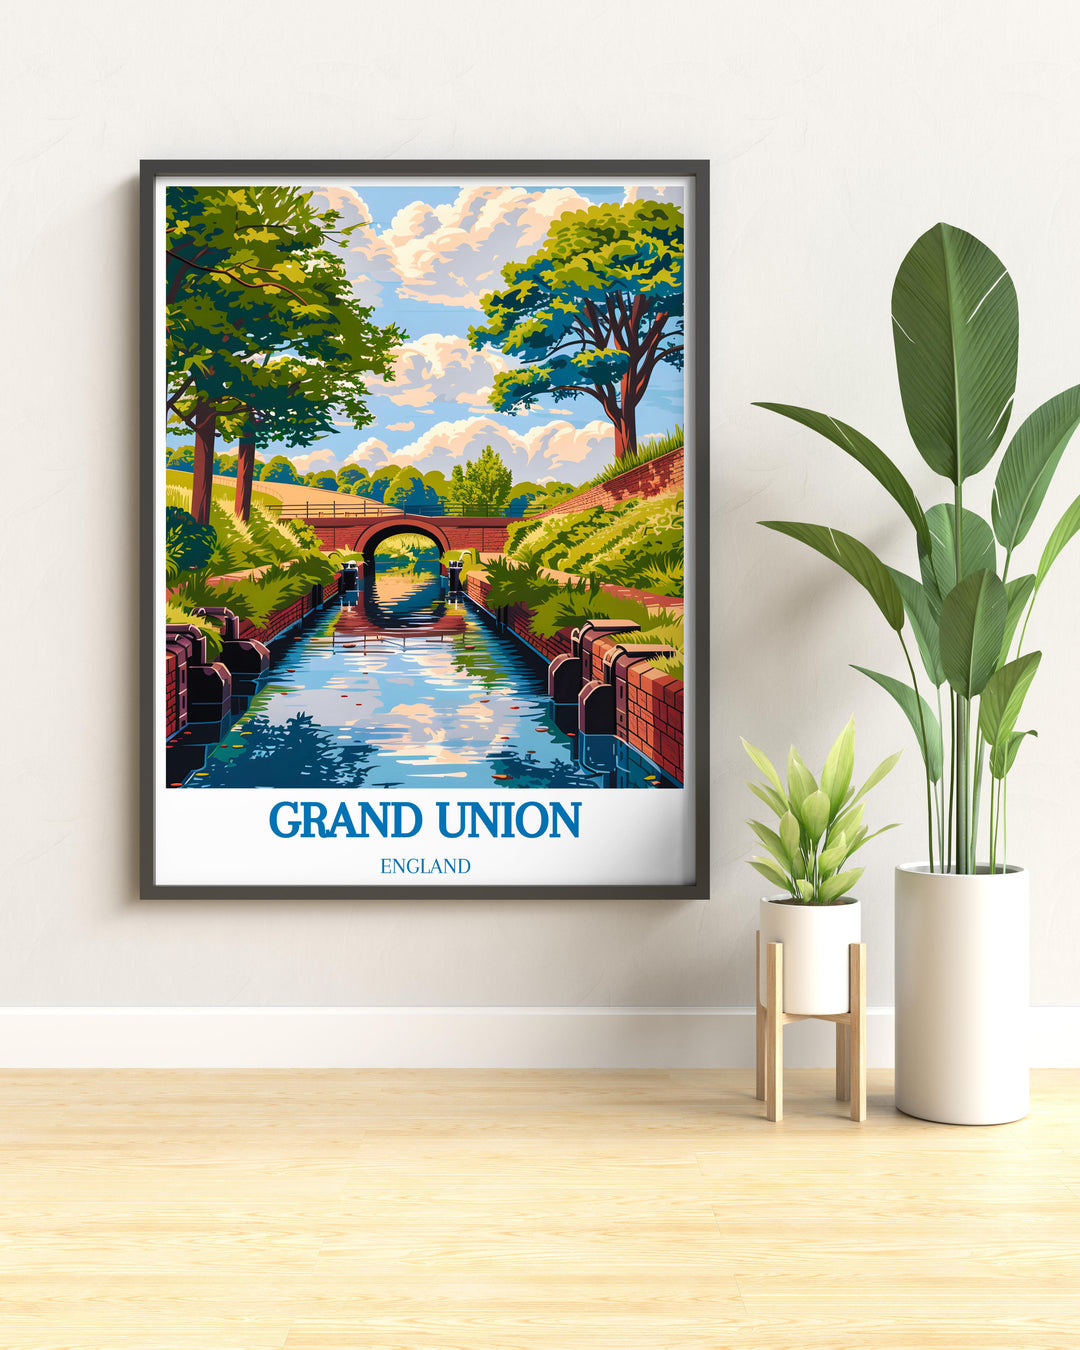 Retro style travel poster depicting the Grand Union Canal with vintage narrowboats and Regents Canal in the backdrop, ideal for collectors of England vintage posters.